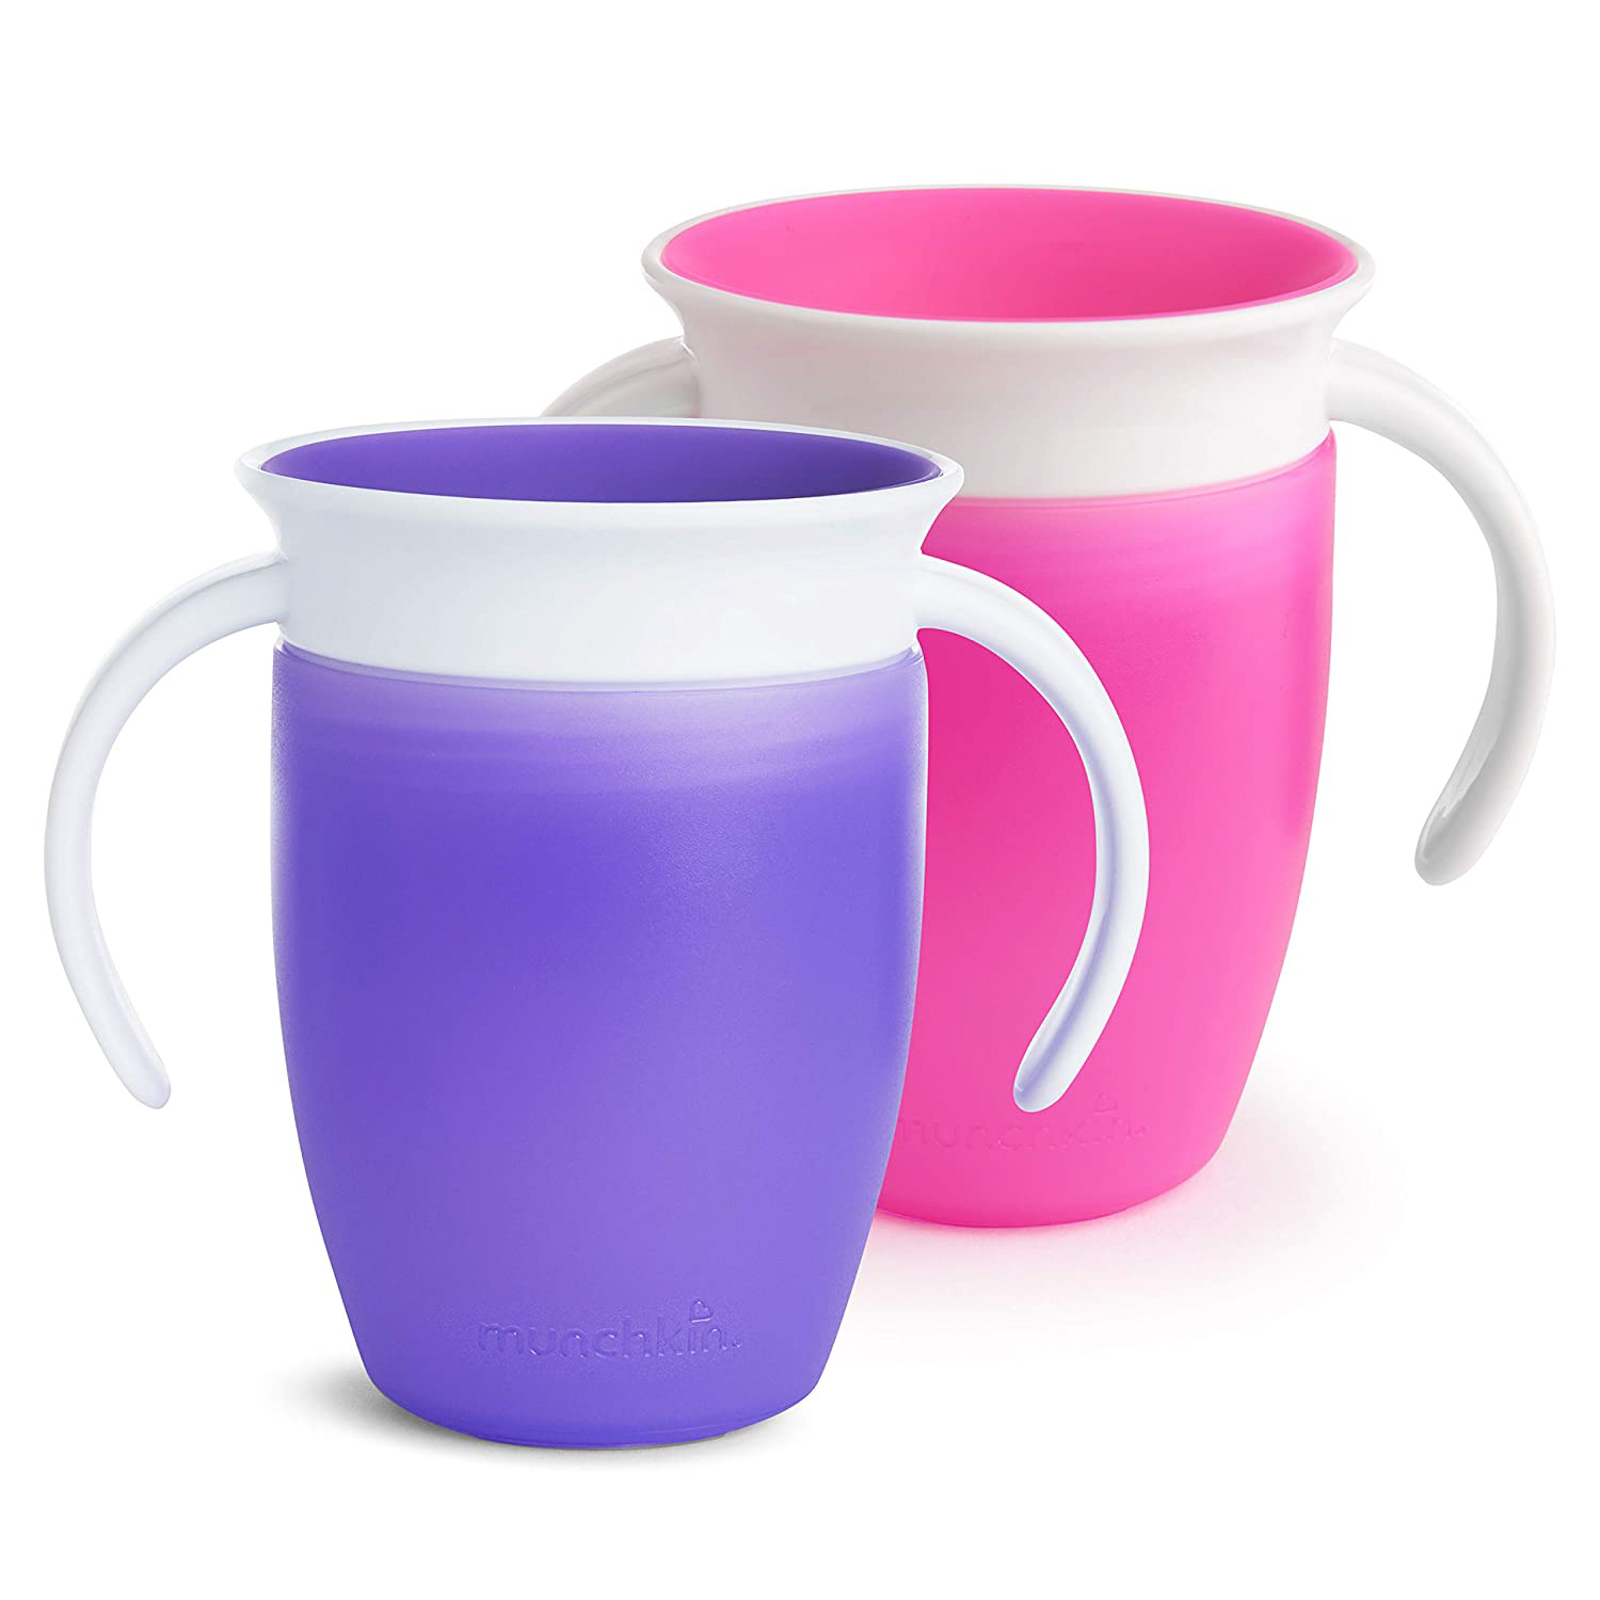 Best sippy cups - Munchkin Miracle 360 Trainer Cup